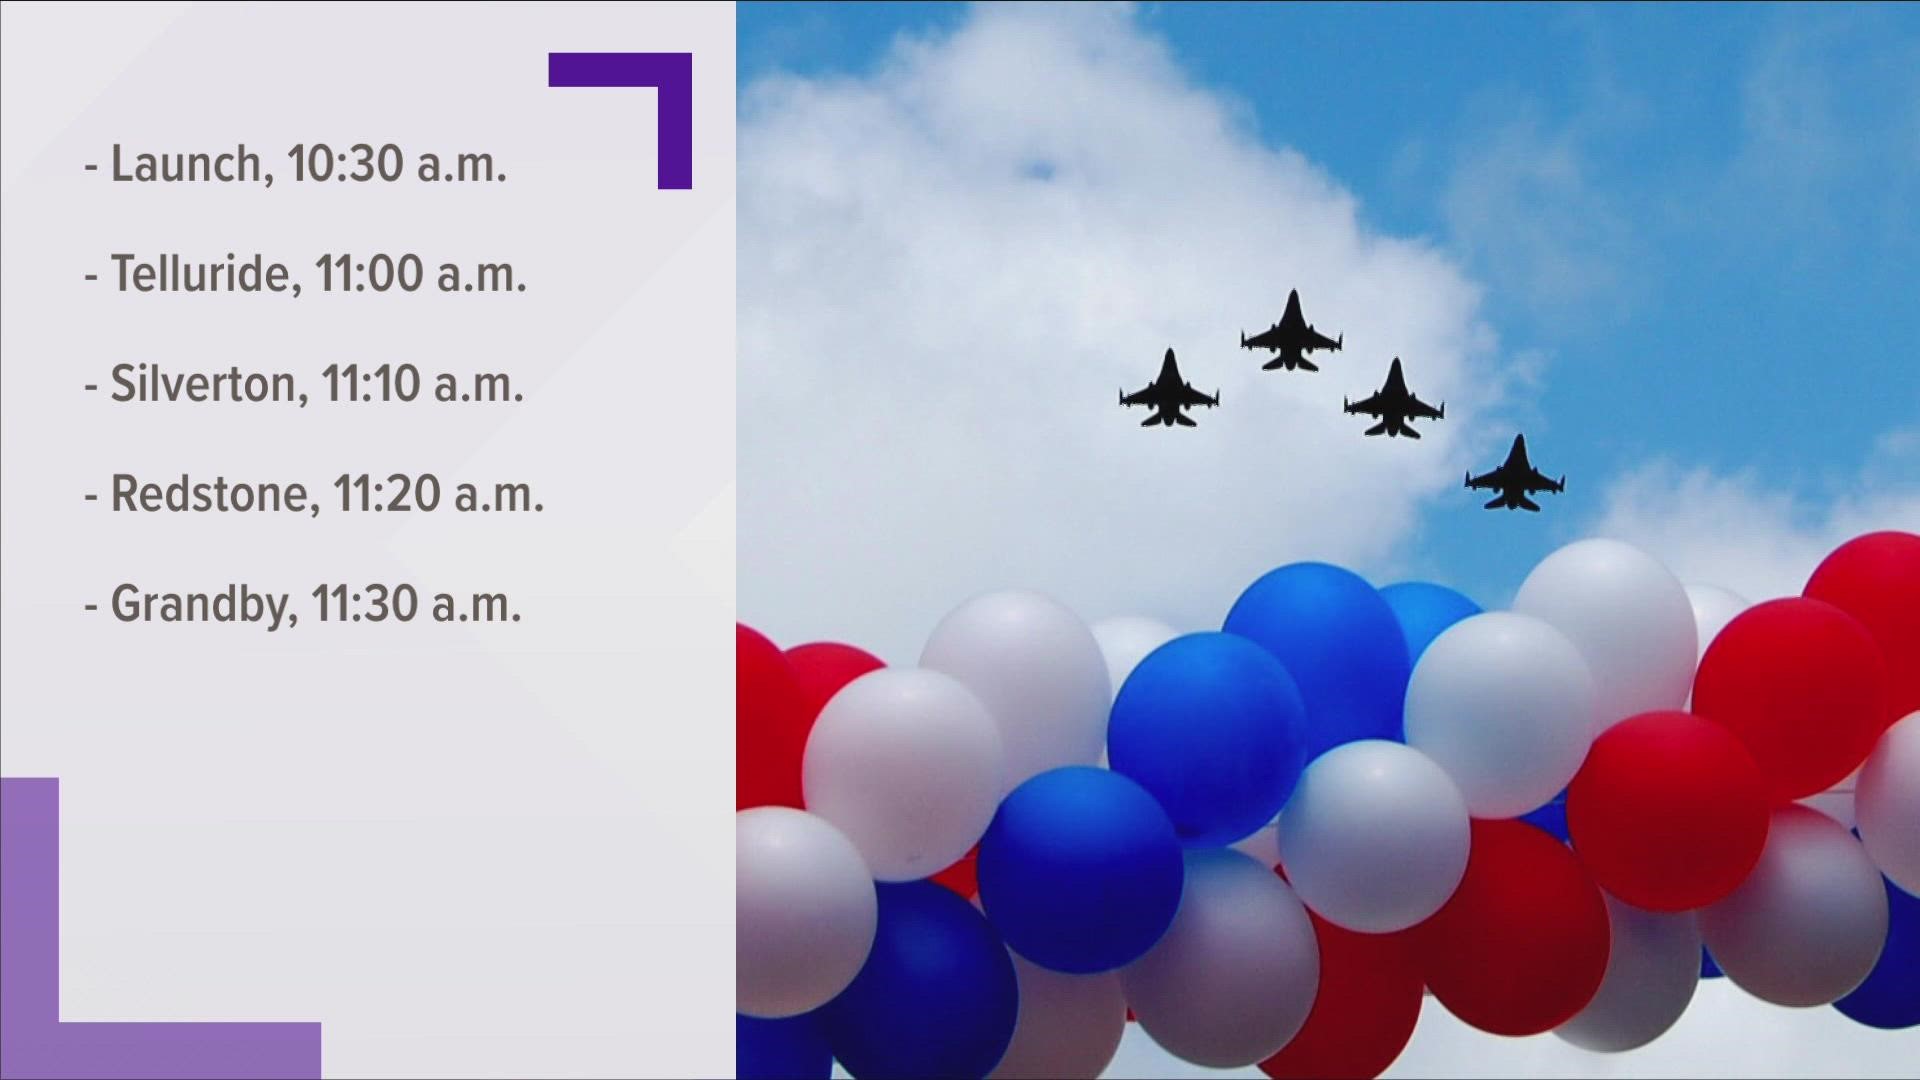 Friday marks the start of 4th of July. With fire bans in place, the Colorado National guard is hosting a fire-safe show with F-16 flyovers.